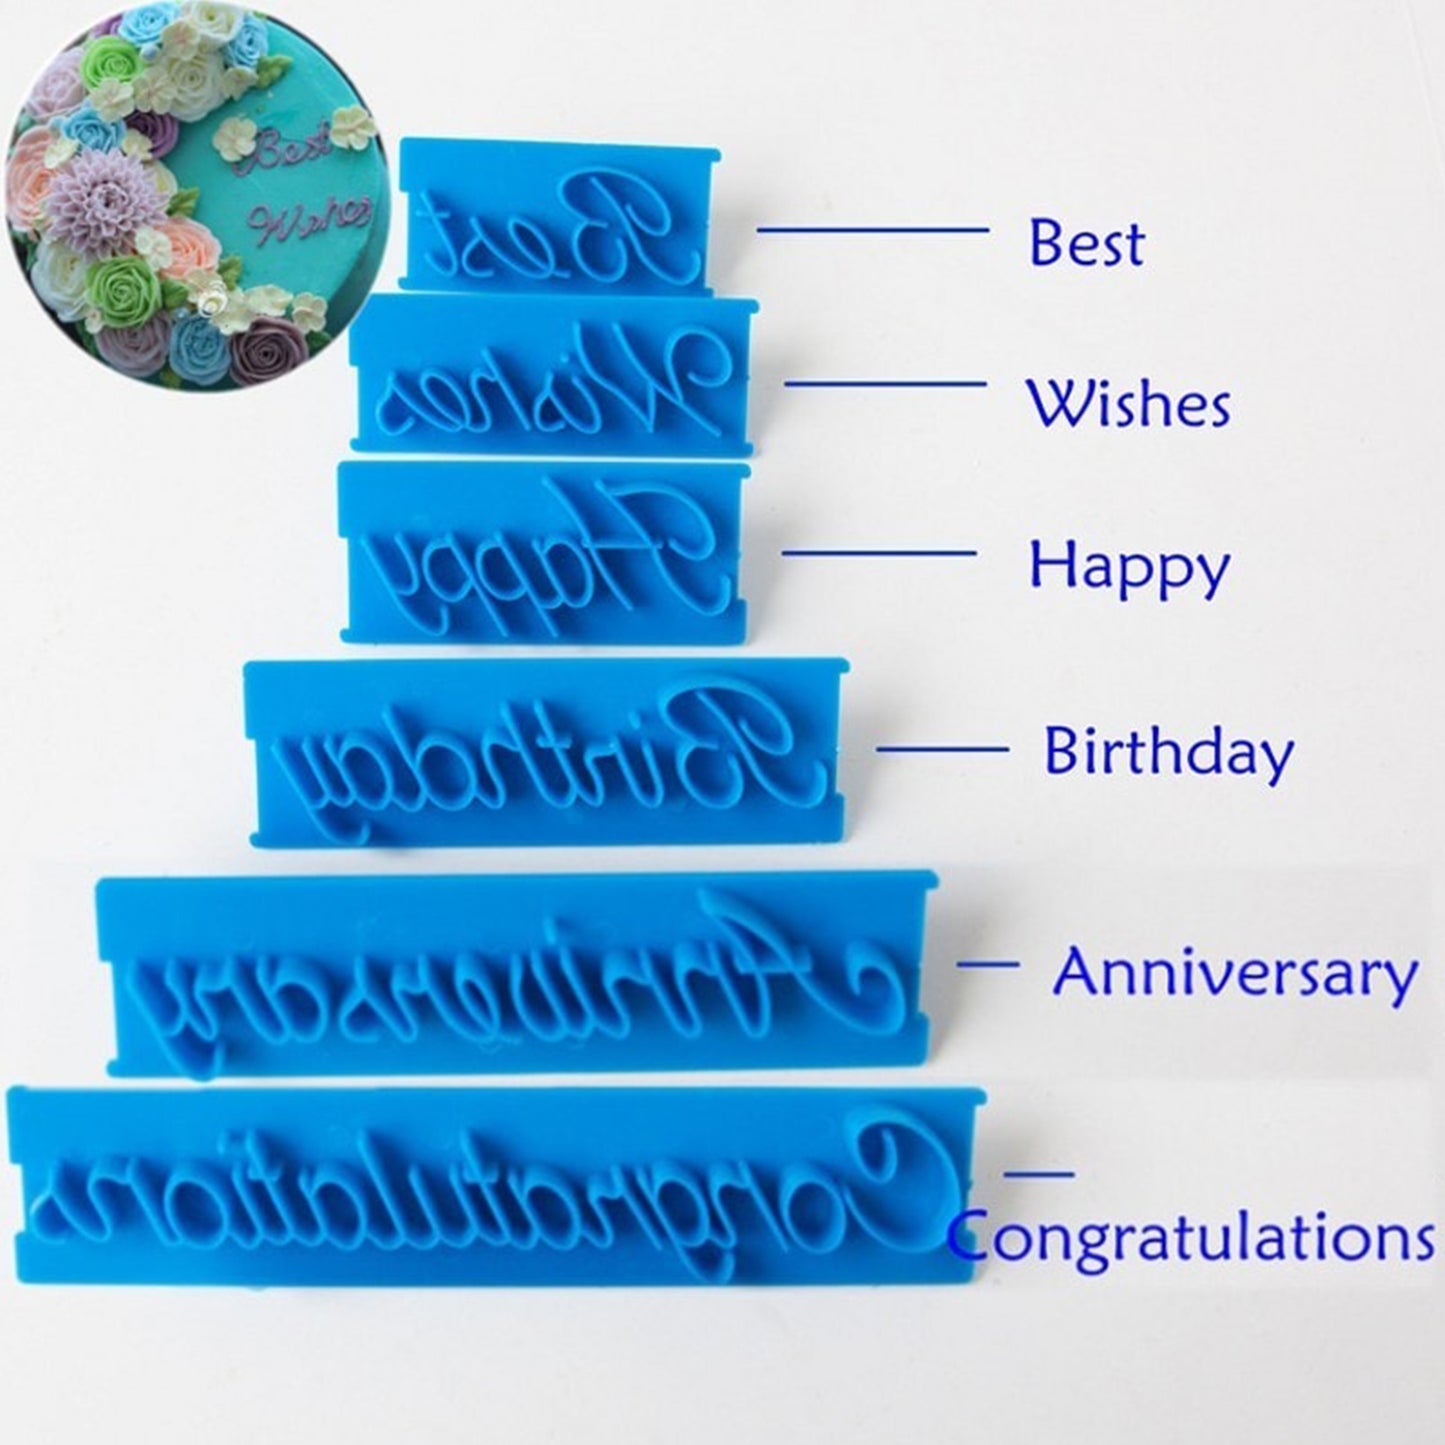 EMBOSSING CAKE WITH WISHES CAKE MOLD